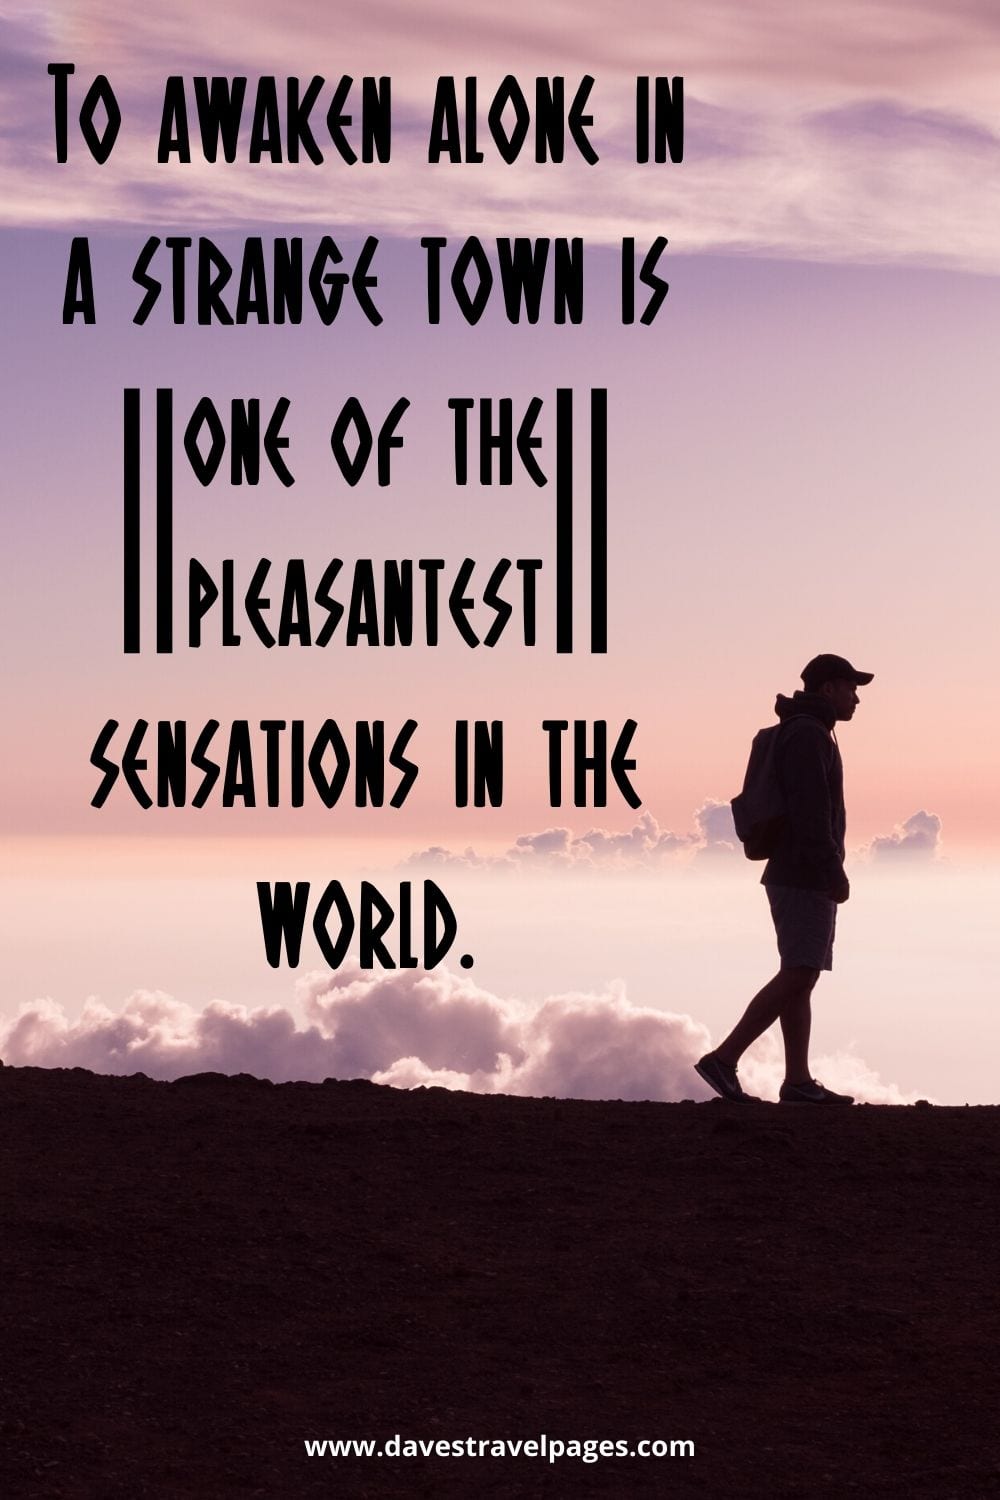 Travel Captions: To awaken alone in a strange town is one of the pleasantest sensations in the world.” – Freya Stark